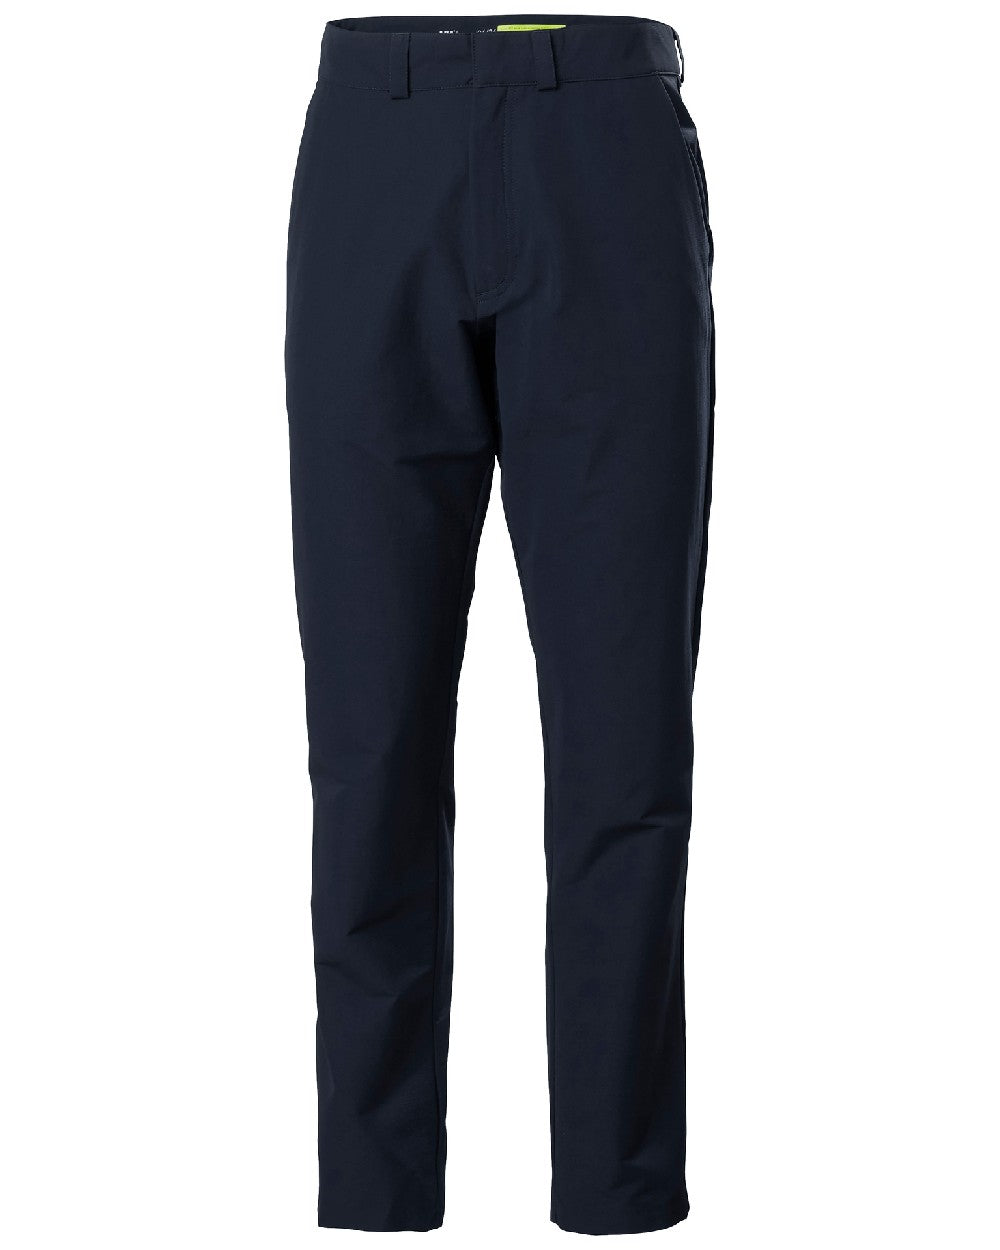 Navy coloured Helly Hansen Mens Quick Dry Pants on white background 